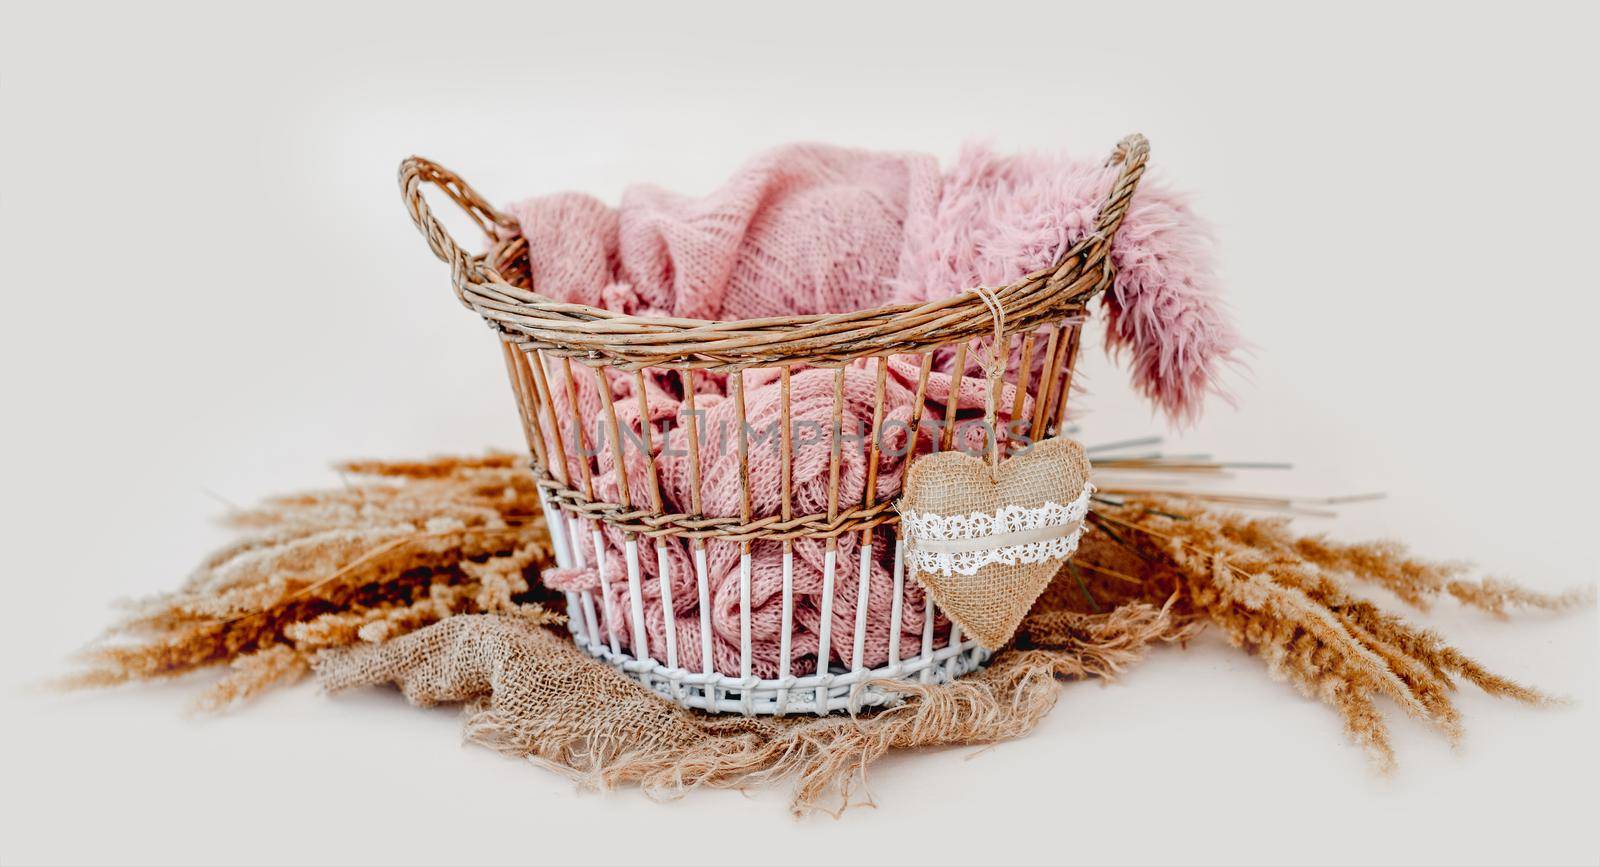 Tiny basket decor for newborn studio photoshoot filled with knitted blanket and toy heart closeup. Infant baby handmade furniture